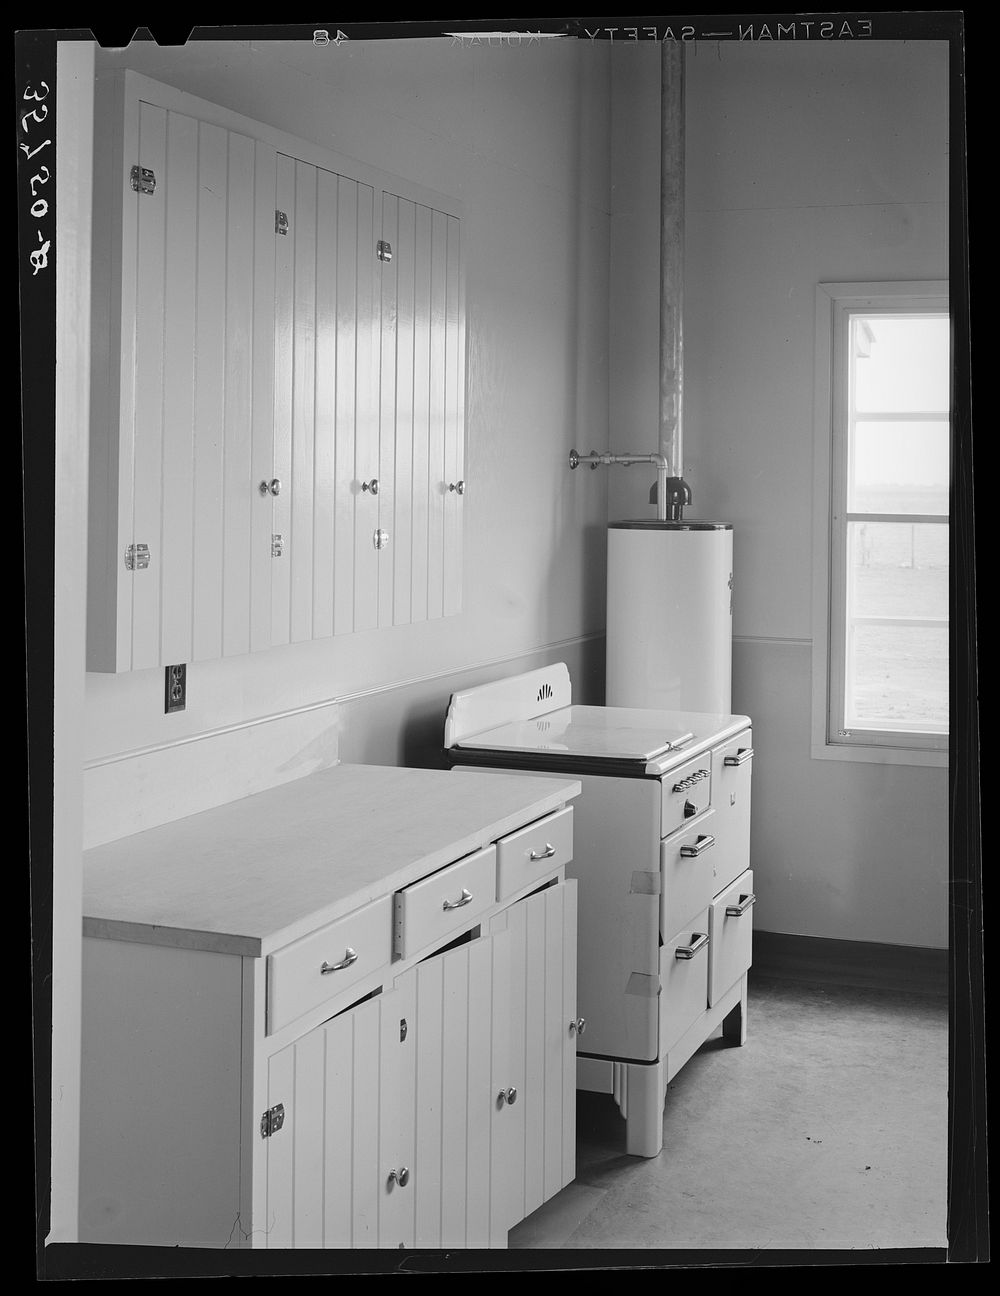 [Untitled photo, possibly related to: Kitchen in the community building at the migratory labor camp. Robstown, Texas] by…